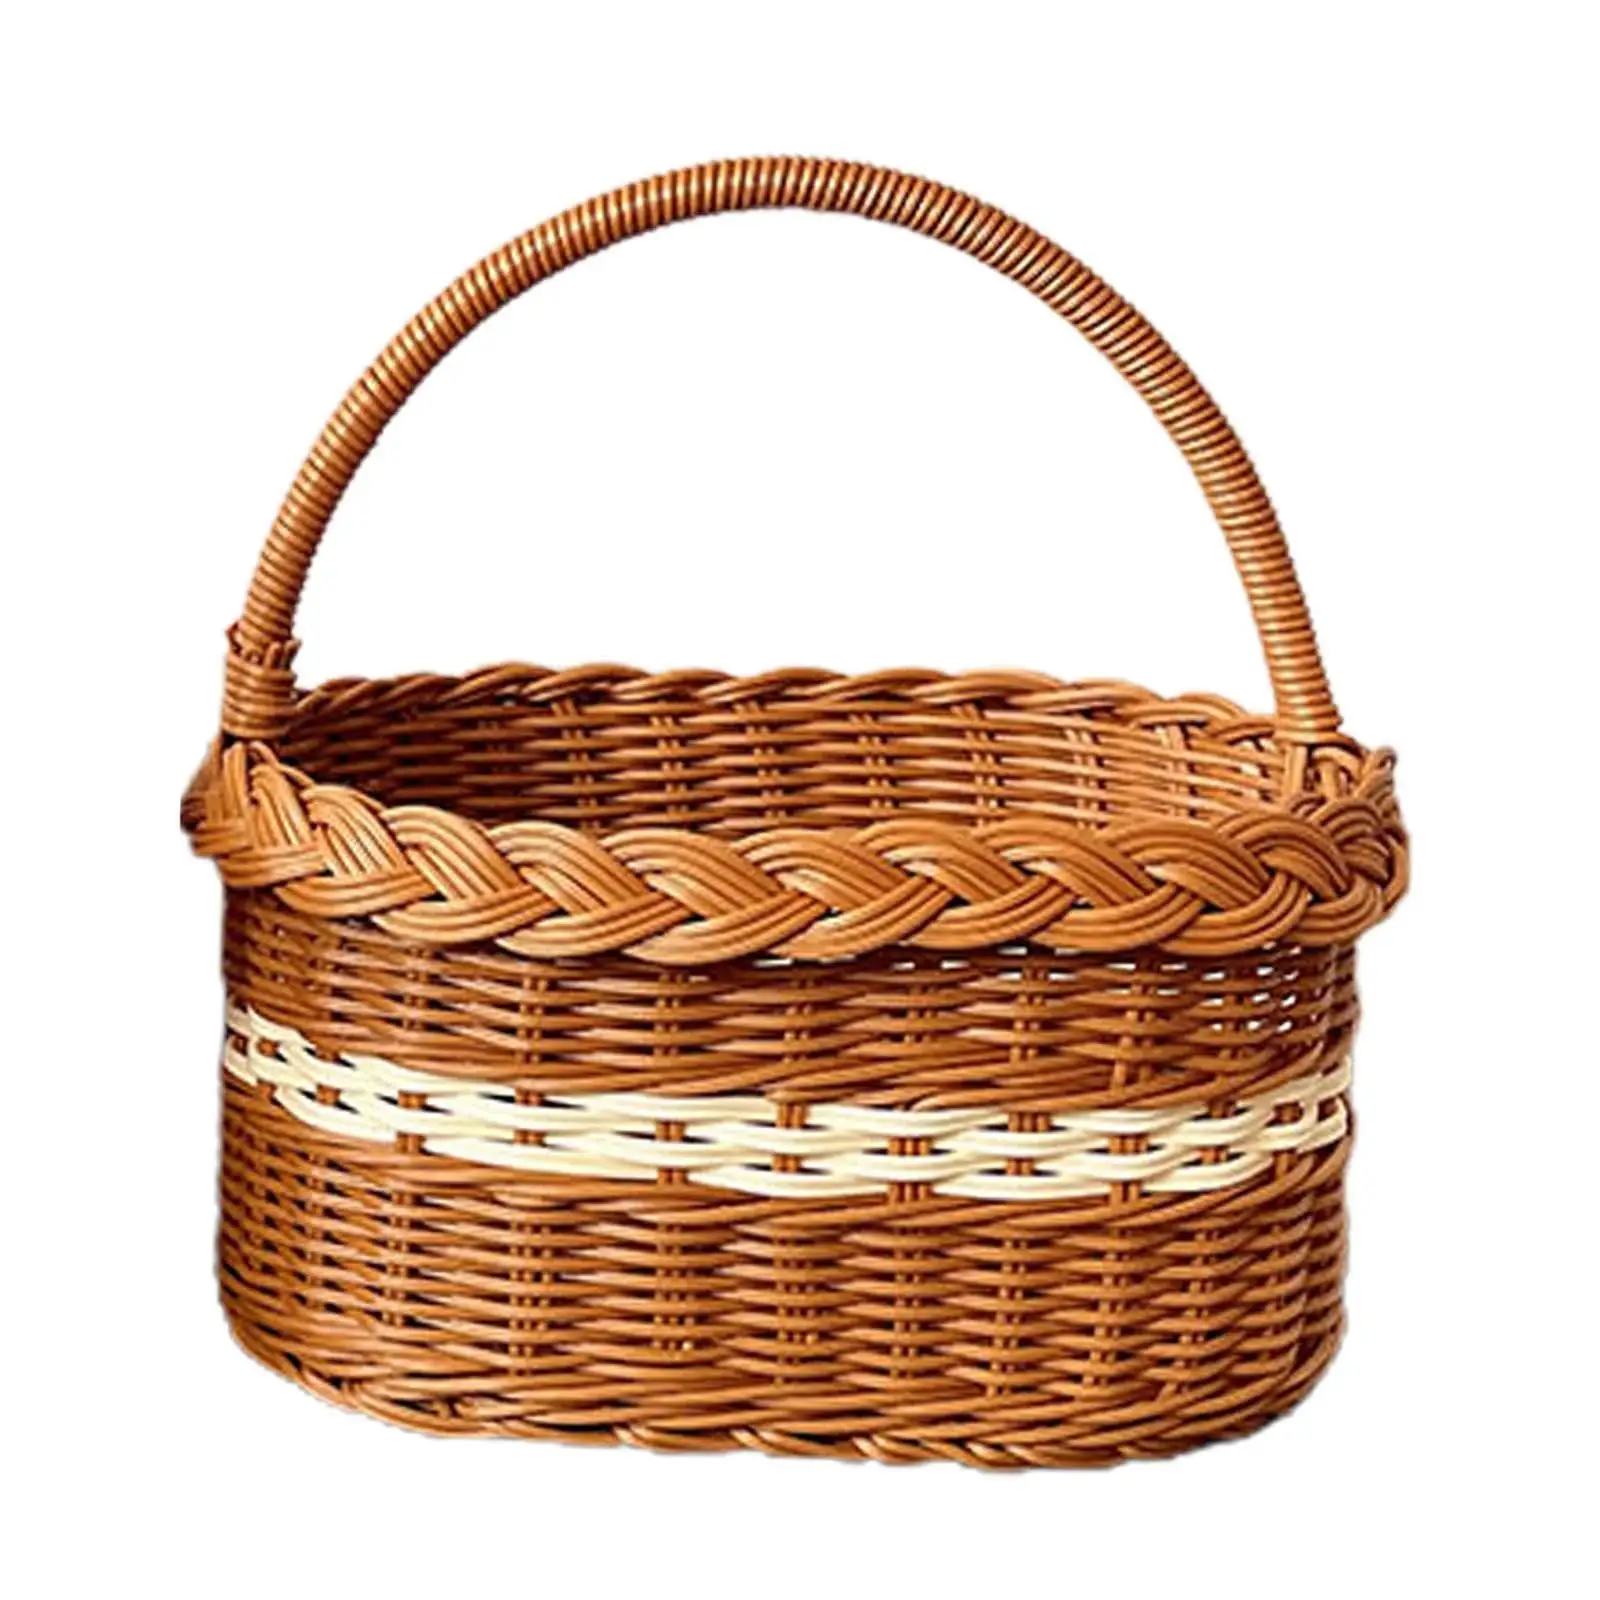 Picnic Baskets with Handles Woven Basket Flower Baskets Woven Storages Basket for Family